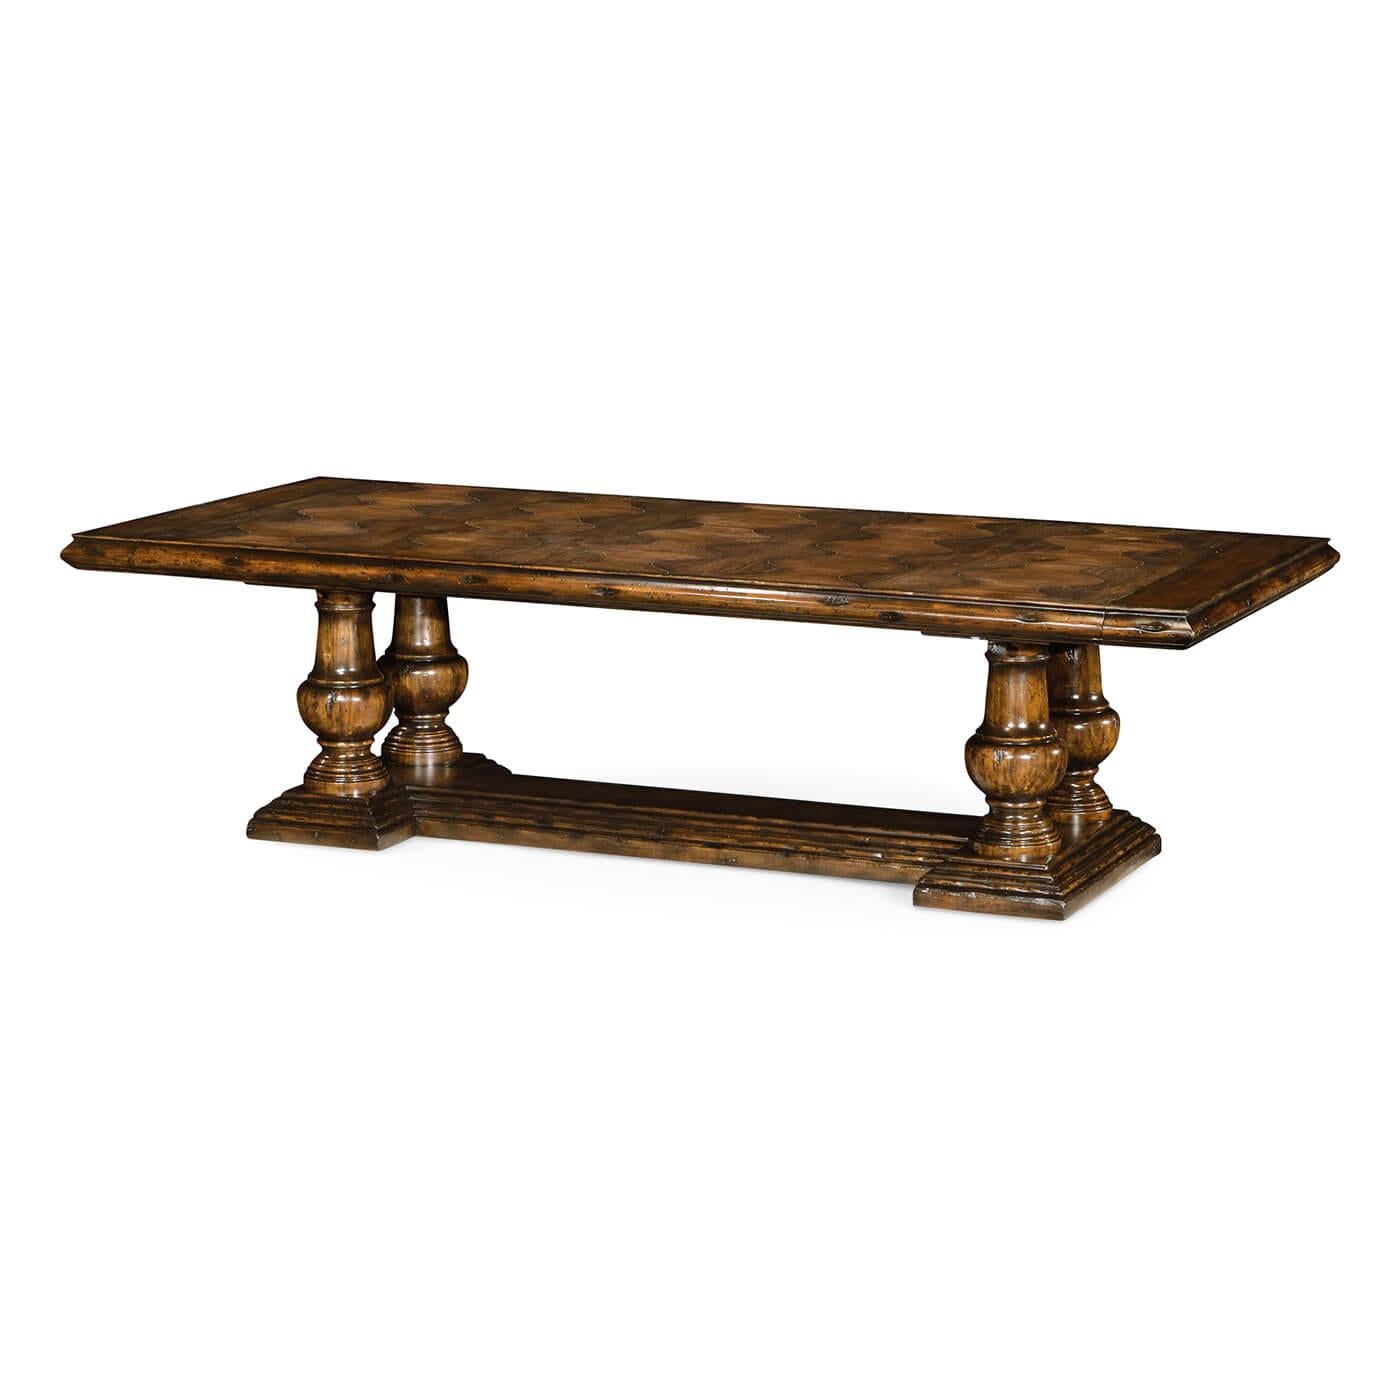 A large French country walnut extending dining table with heavily distressed driftwood. The top with an unusual parquetry design with a deep molded edge on four bold turned baluster columns and a thick H for stretcher base.

Open dimensions: 146